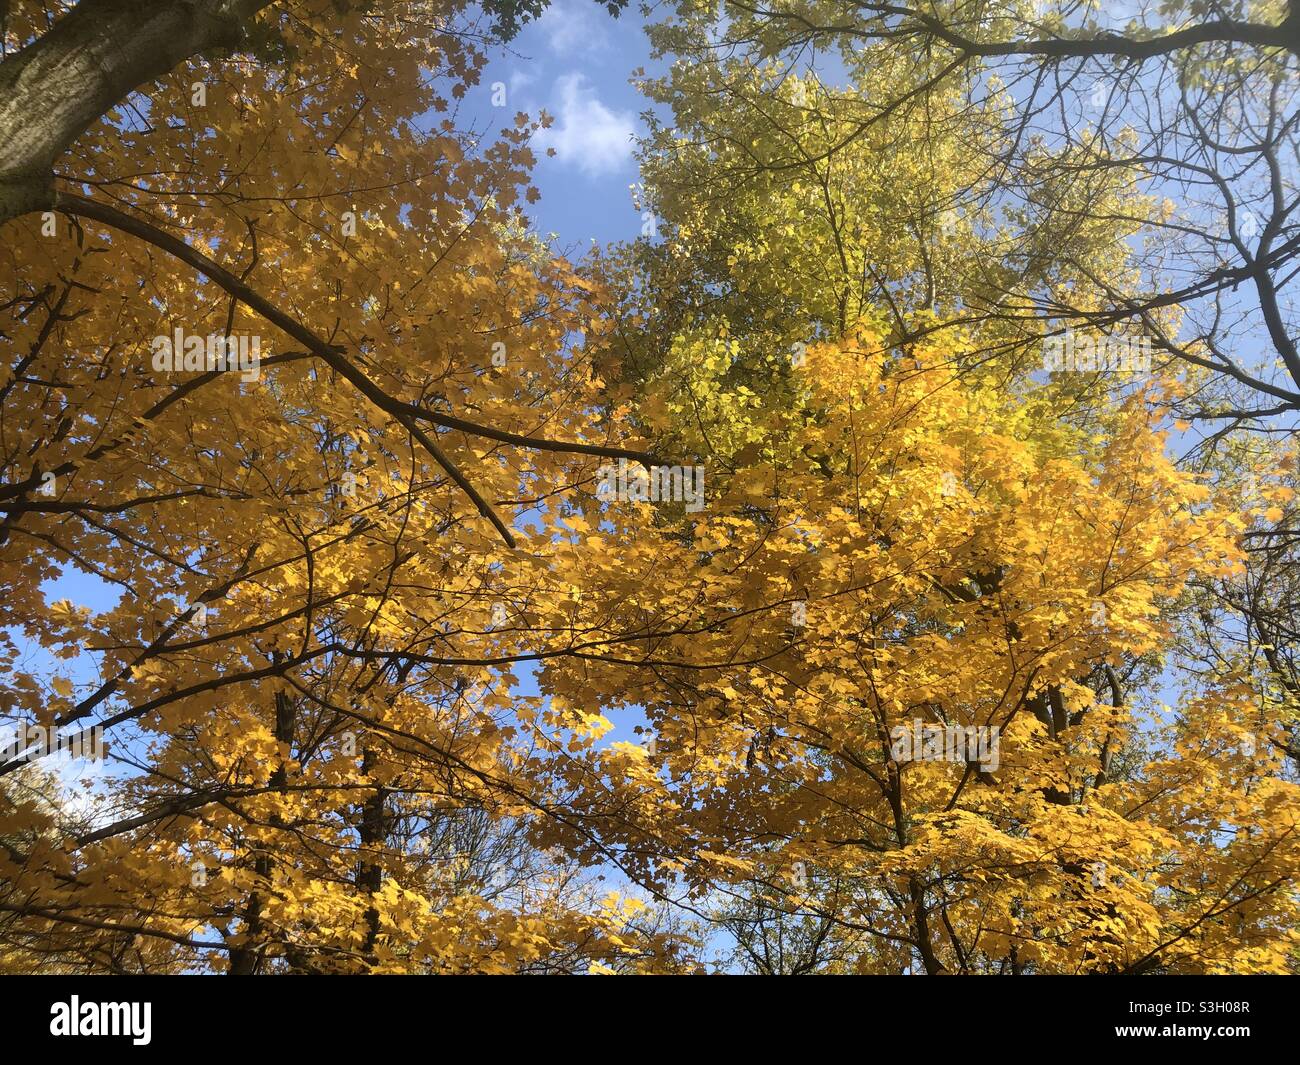 Fall leaves in Stratford Ontario Canada Stock Photo